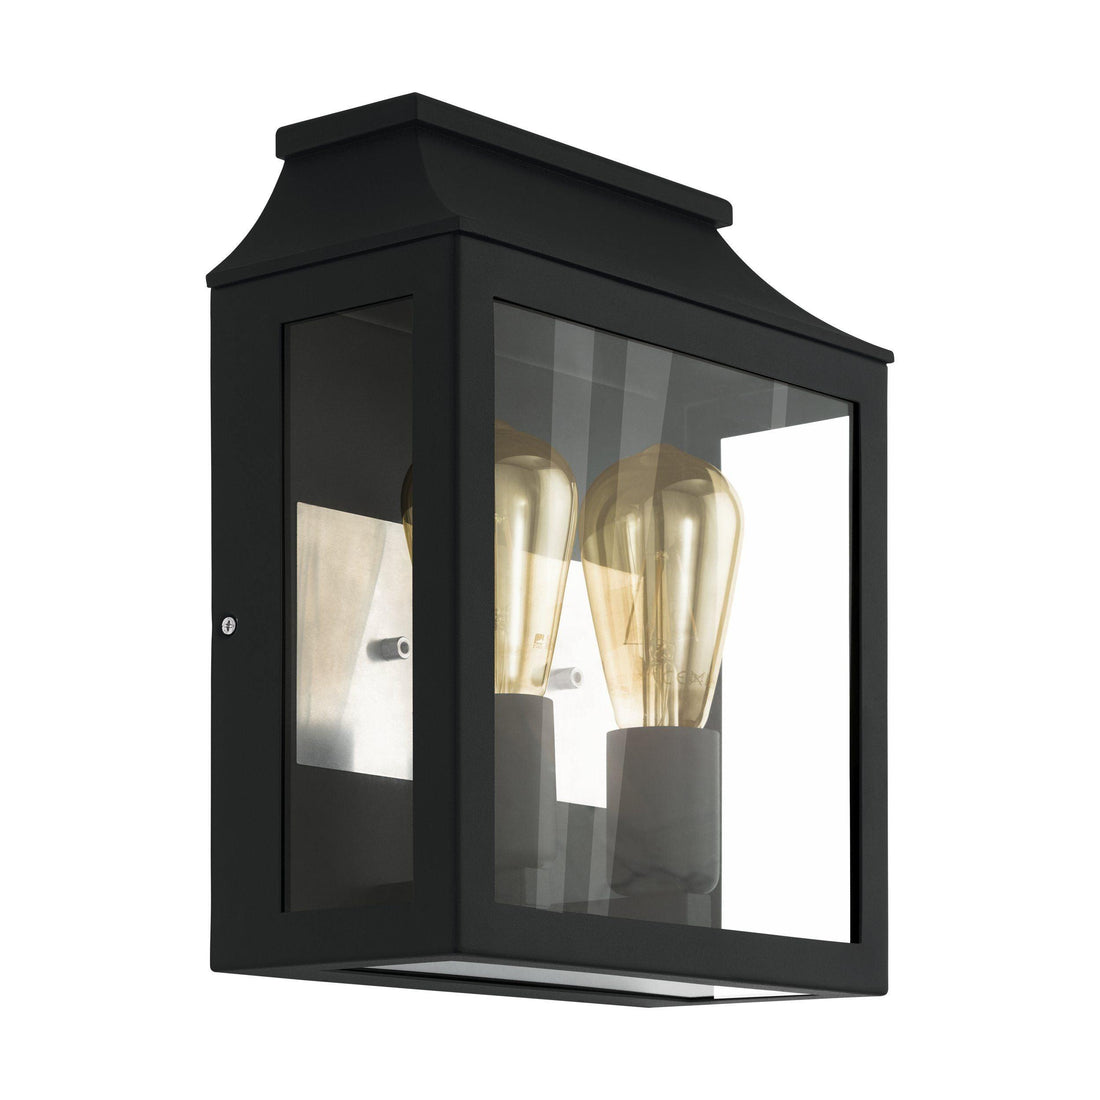 SONCINO Outdoor Wall Light by The Light Library